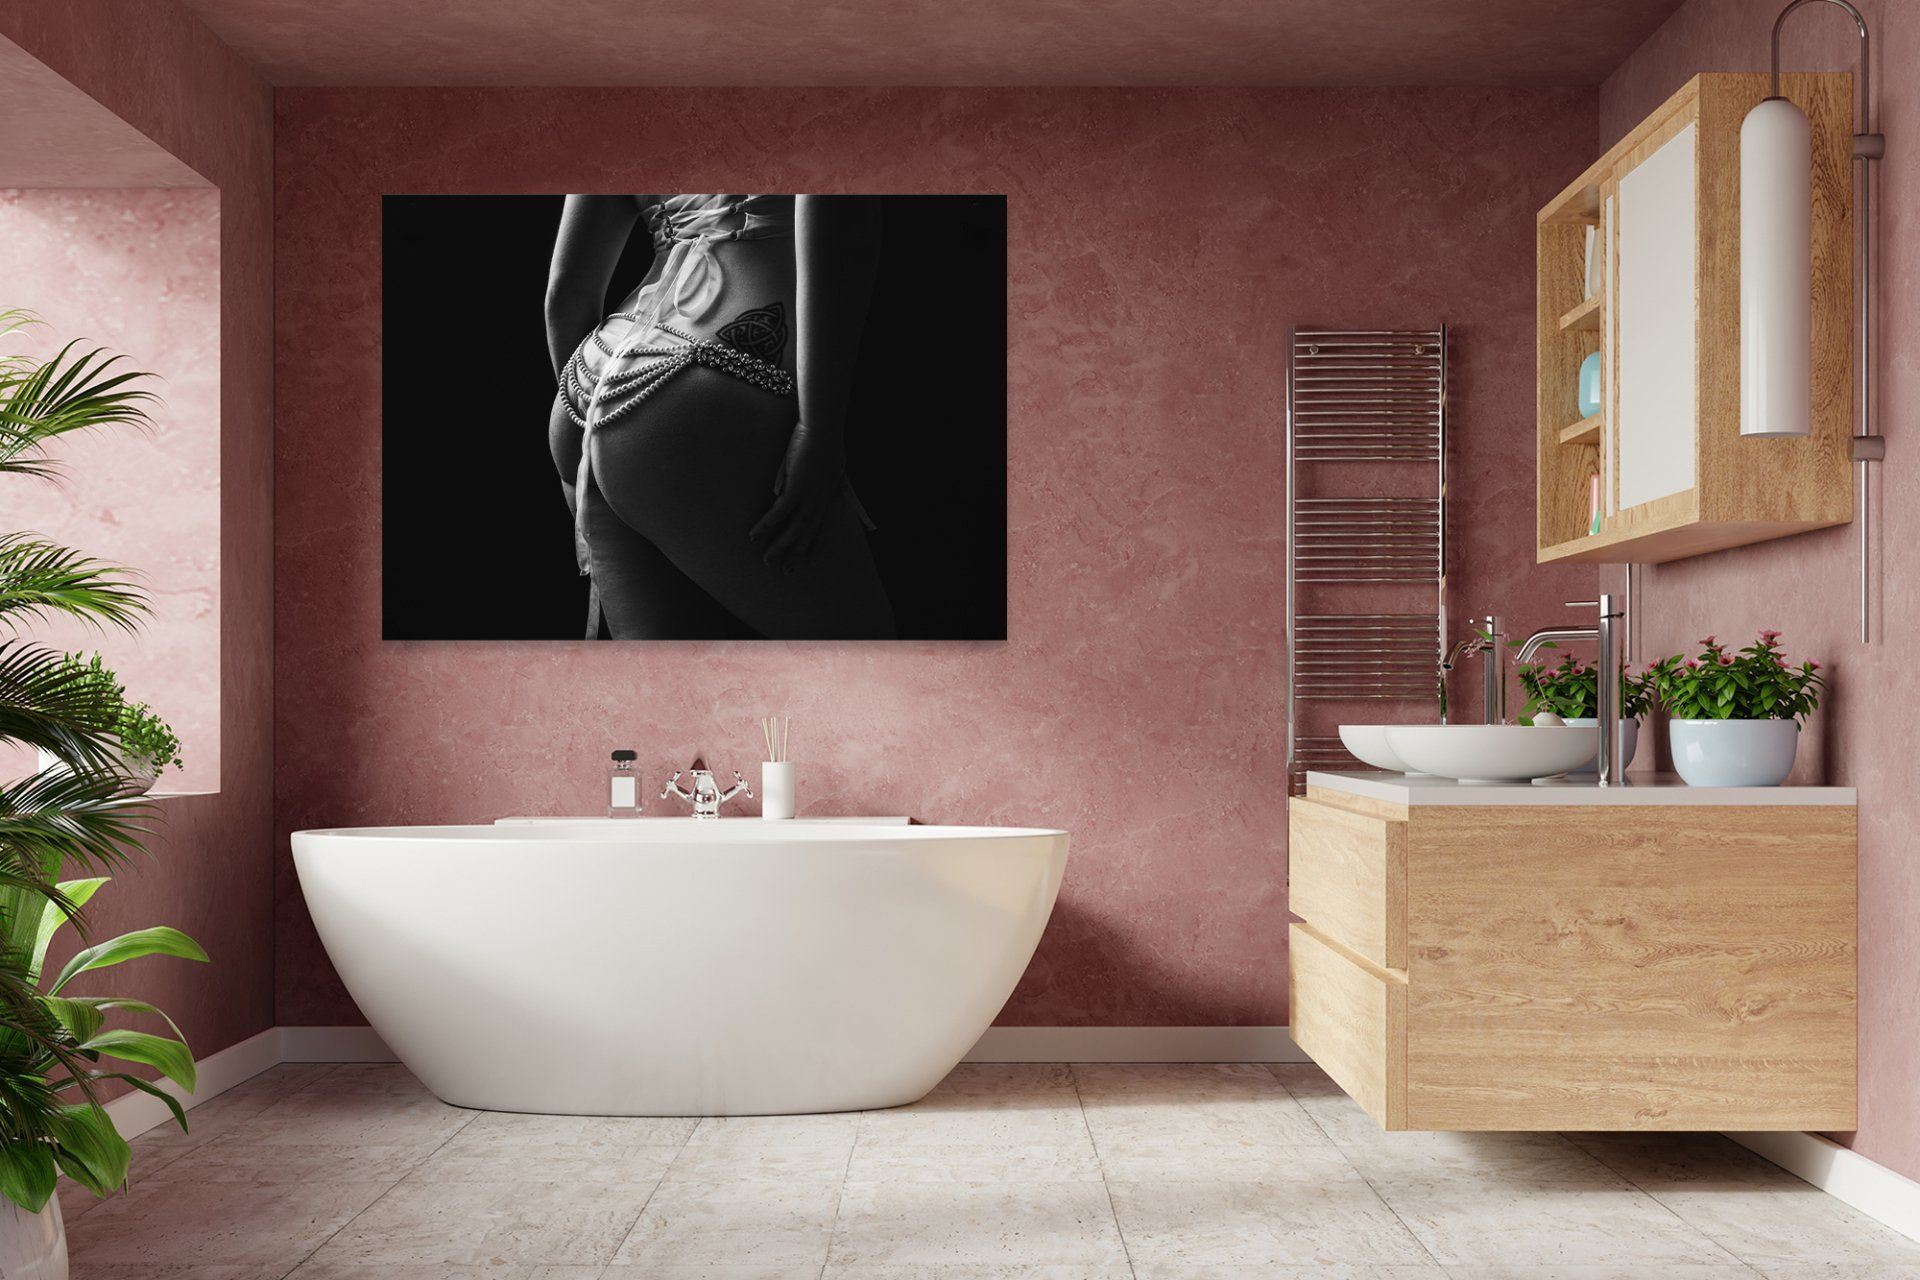 A bathroom with a large bathtub and a large painting.